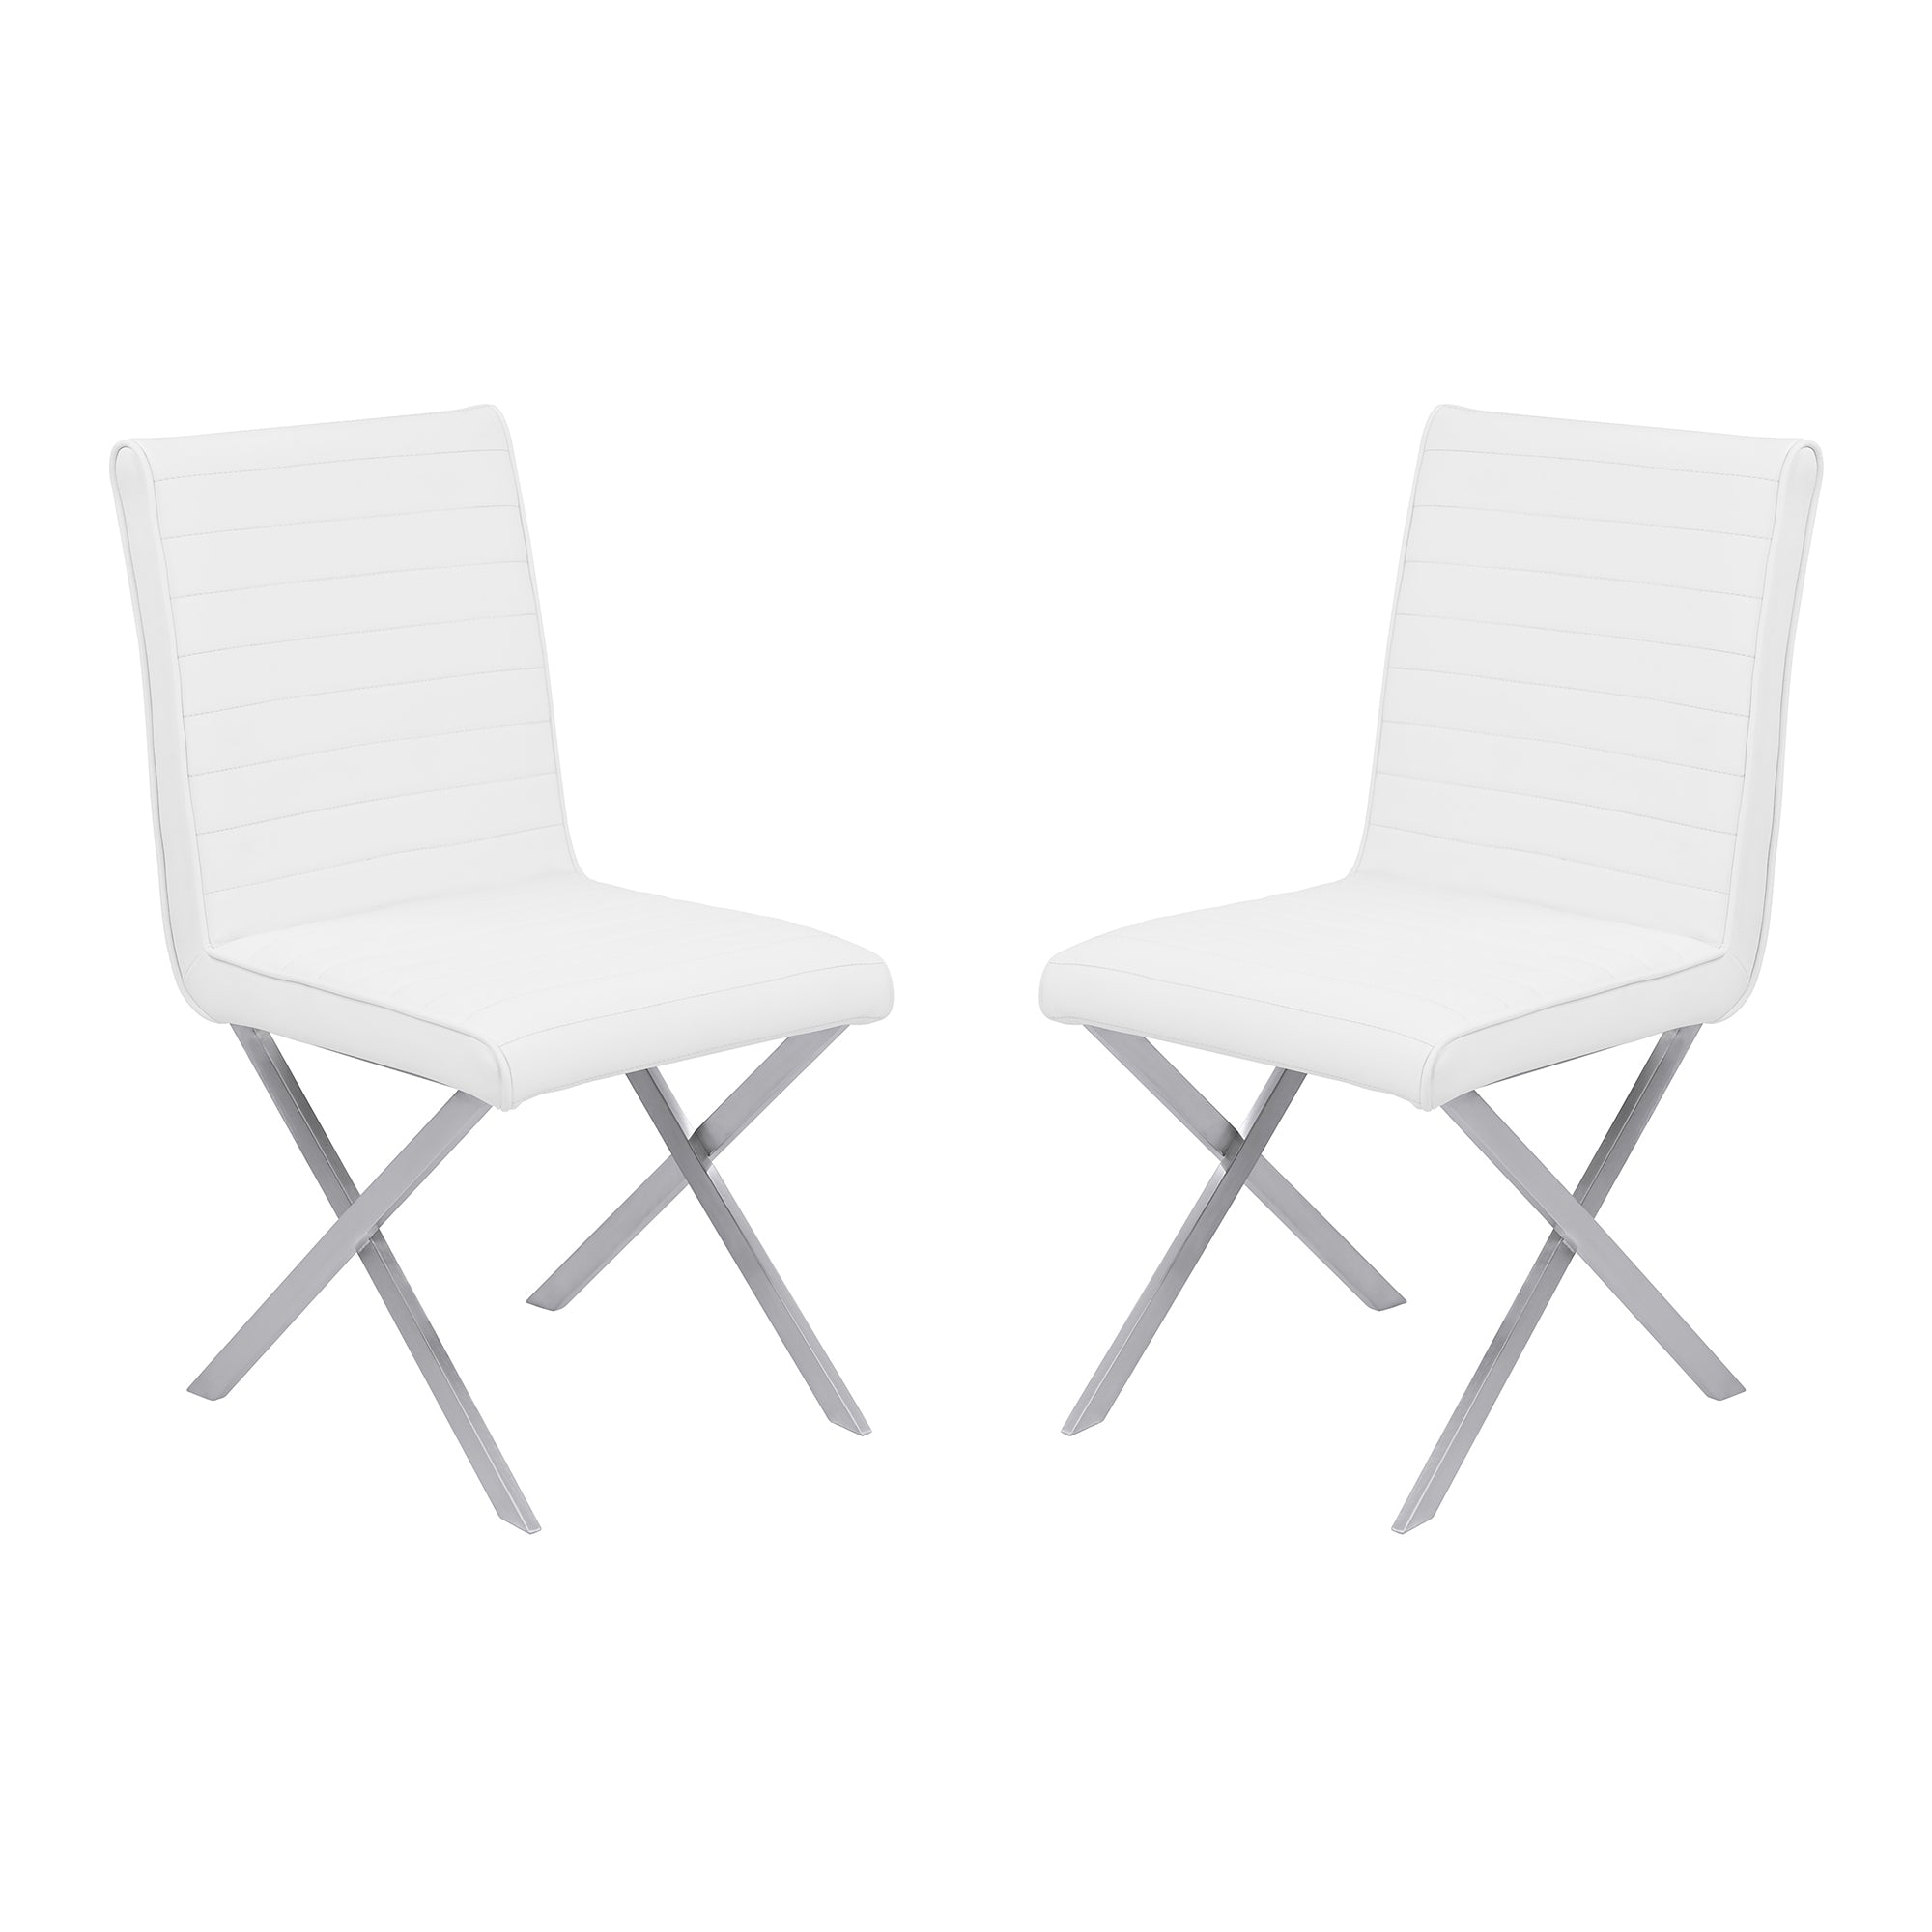 Armen Living Lctesiwhbs Tempe Contemporary Dining Chair In White Faux Leather With Brushed Stainless Steel Finish - Set Of 2